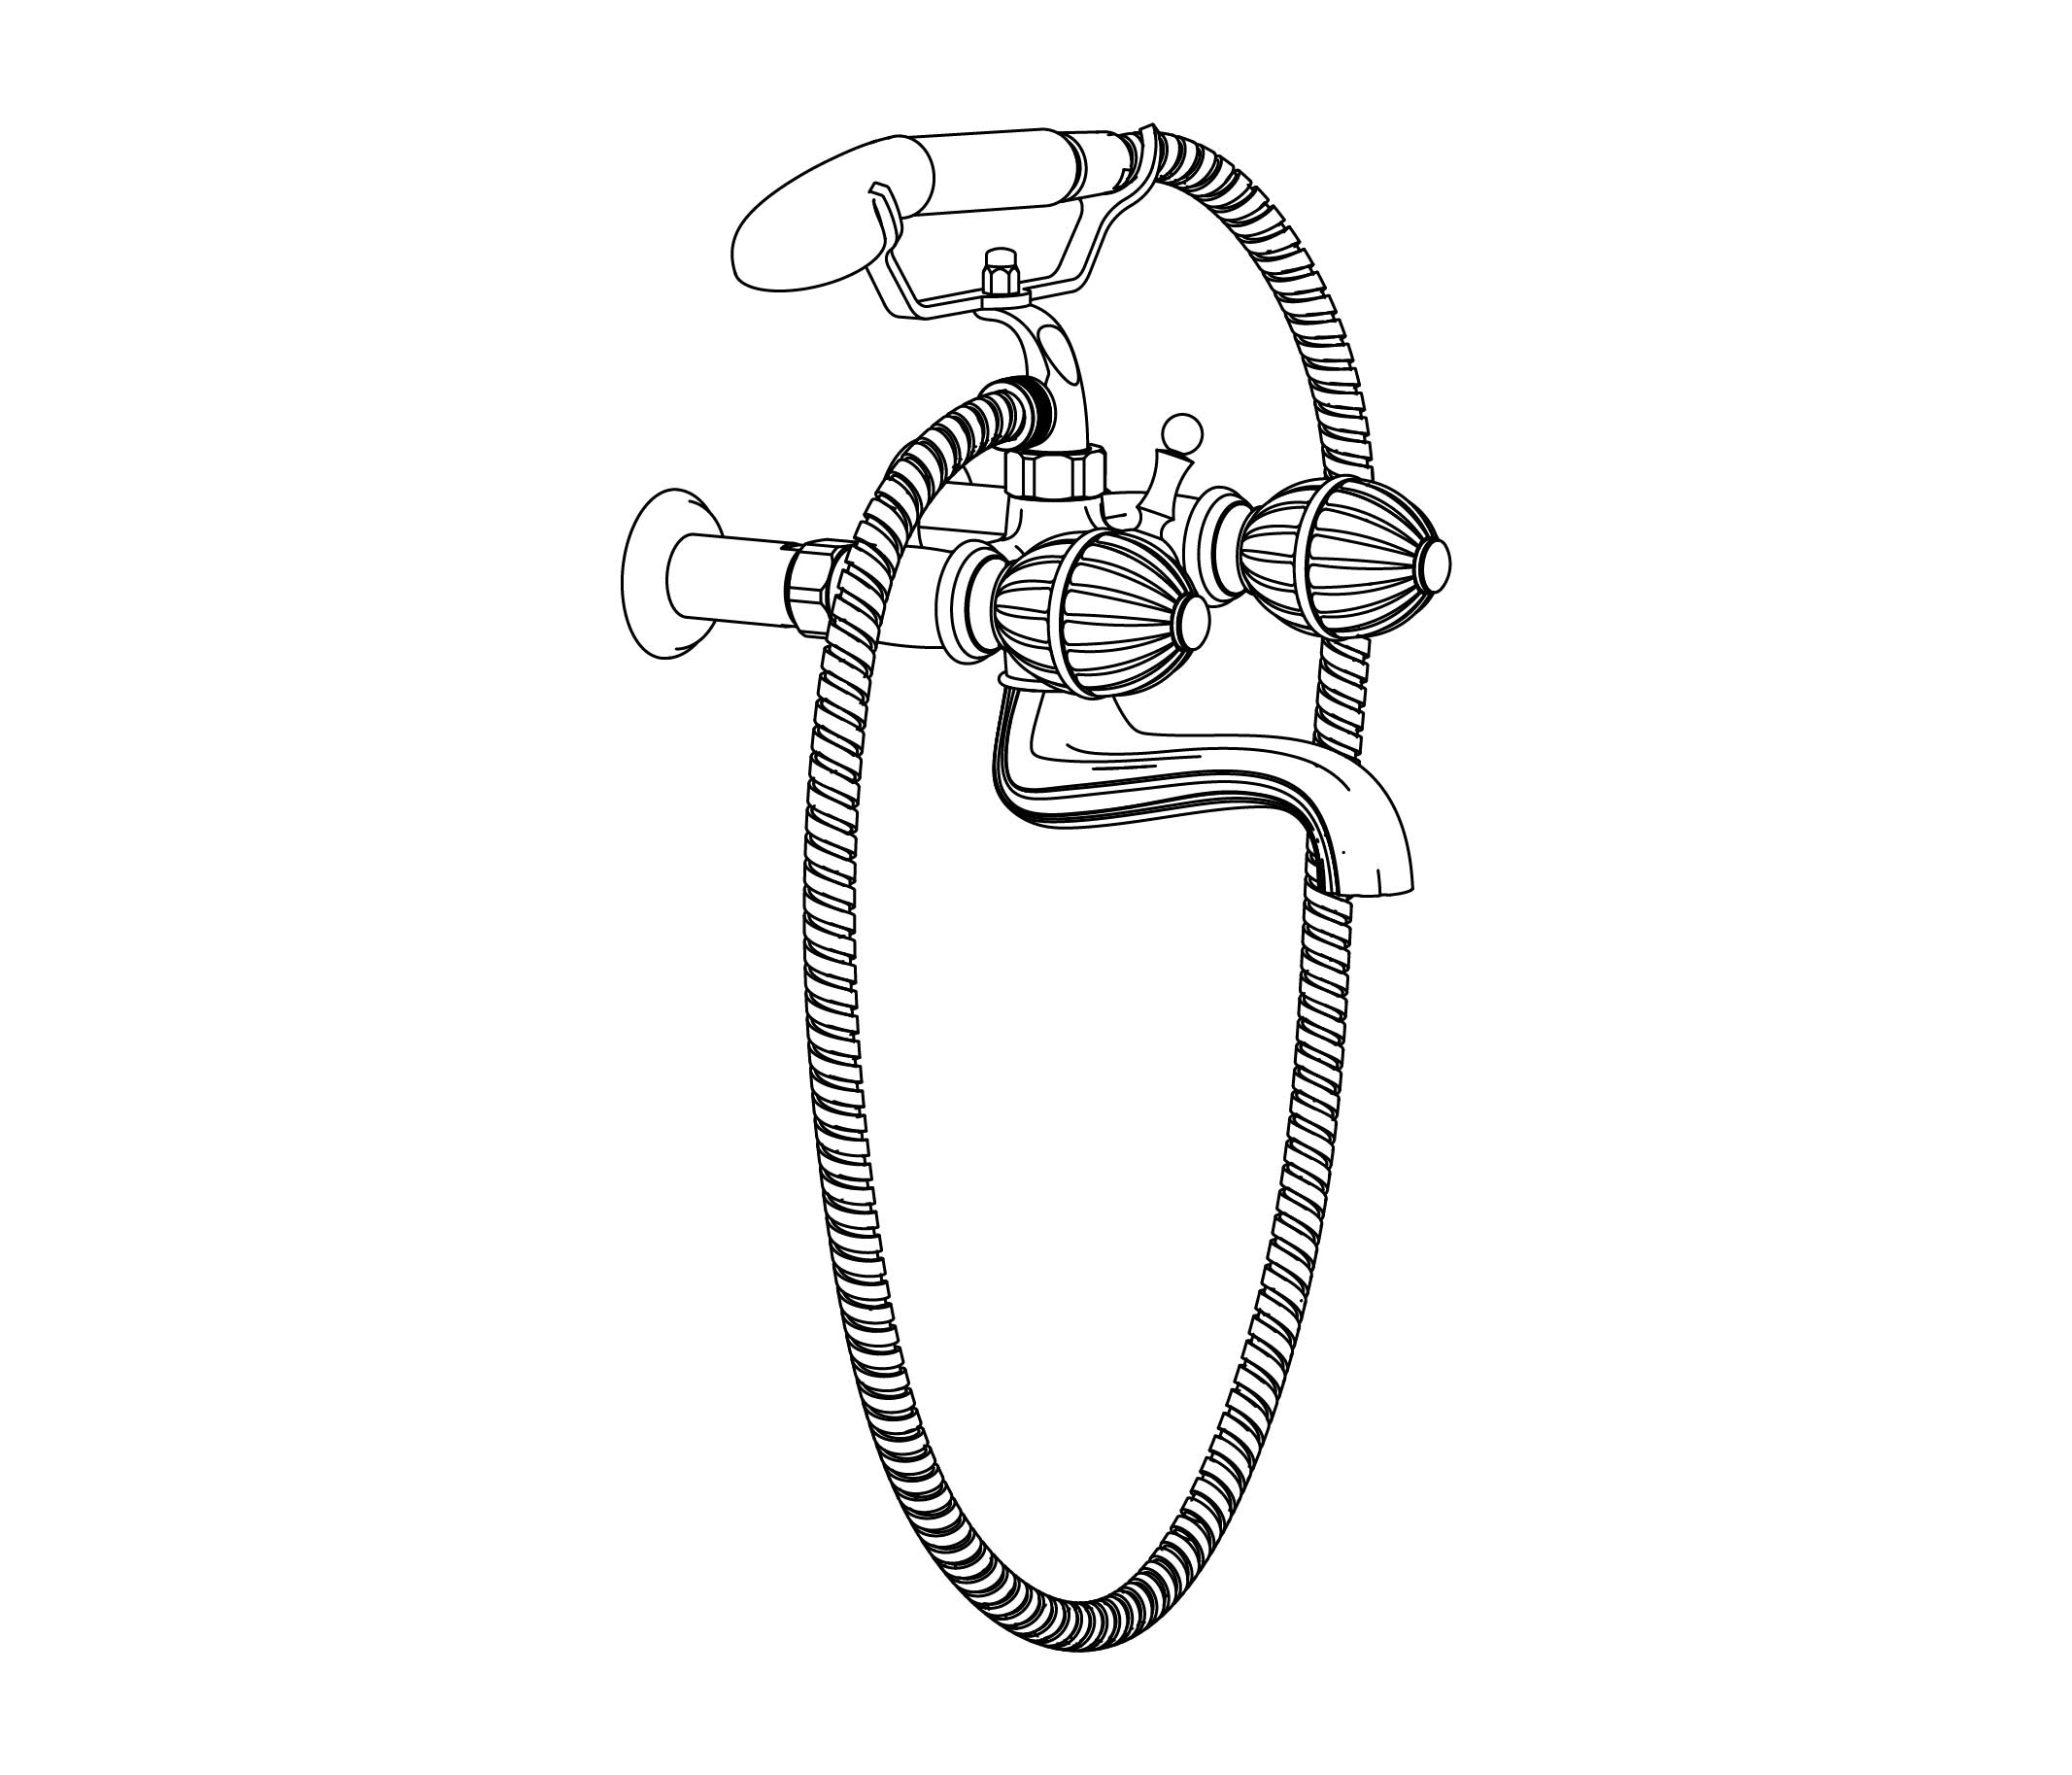 C71-3201 Wall mounted bath and shower mixer